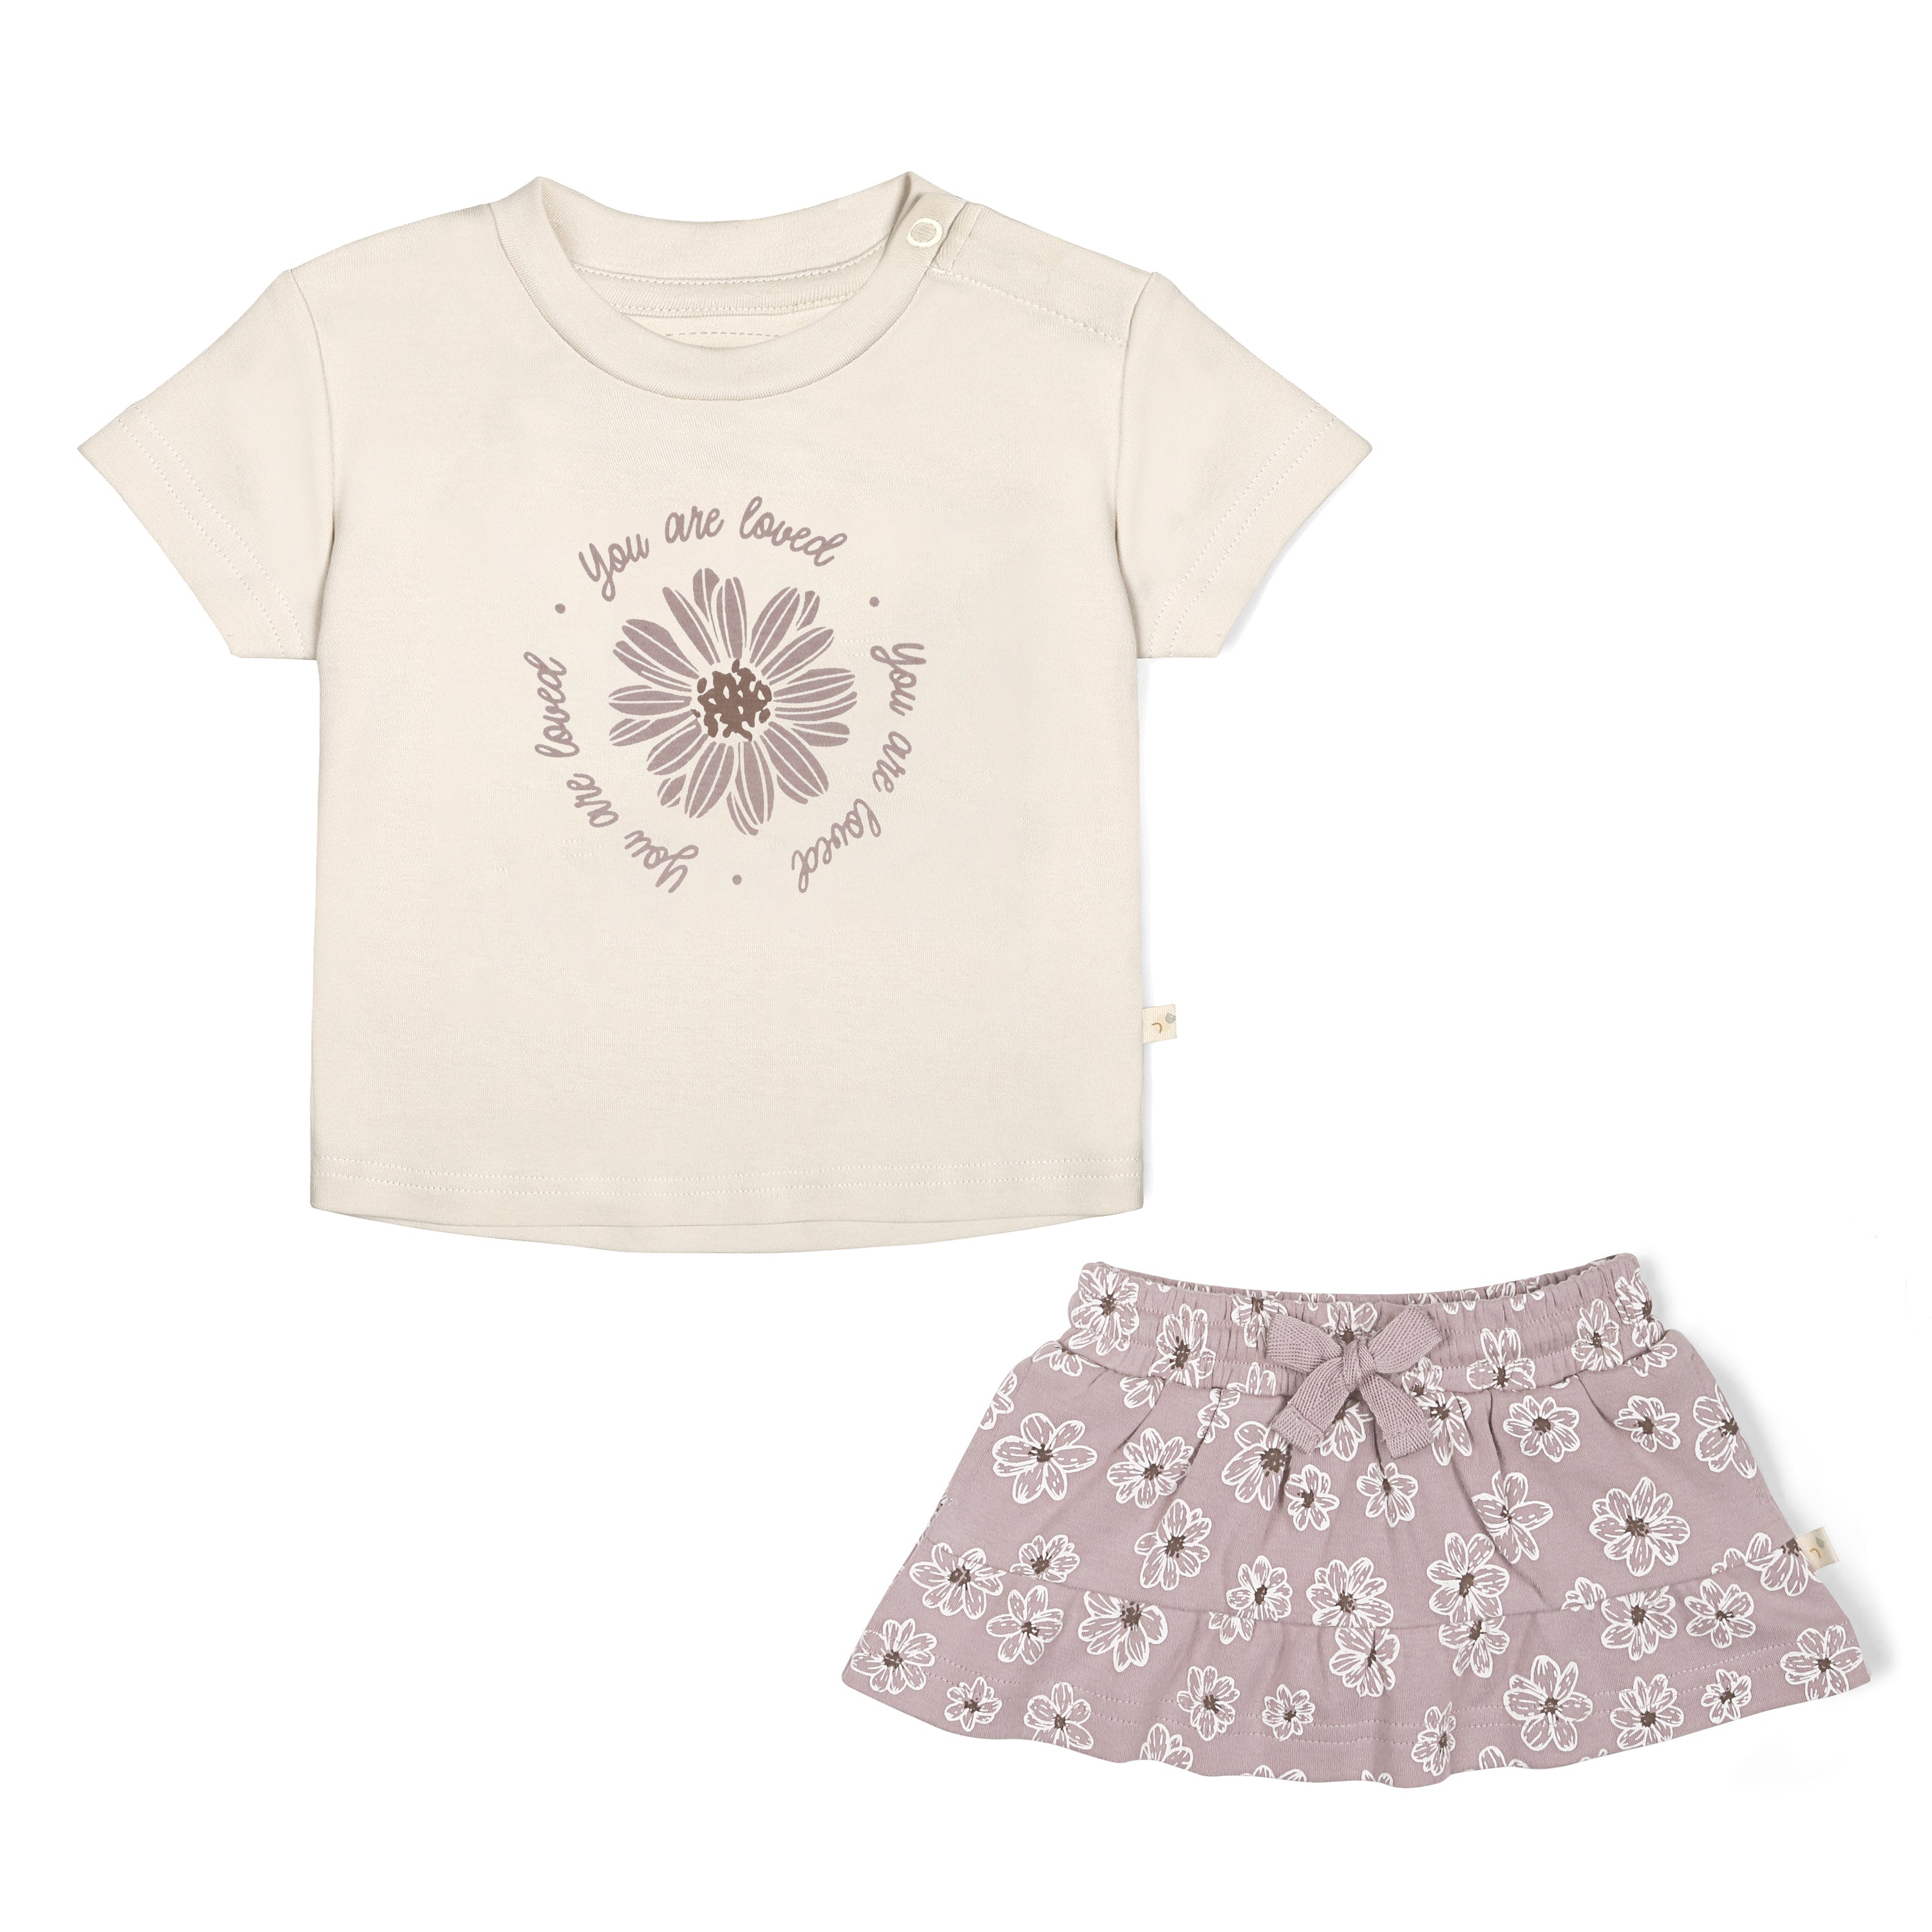 A light beige toddler Boxy Tee and Skort Set - Daisies with the phrase "you are loved" and a flower design paired with a gray floral print skirt, photographed on a white background by Organic Girls.